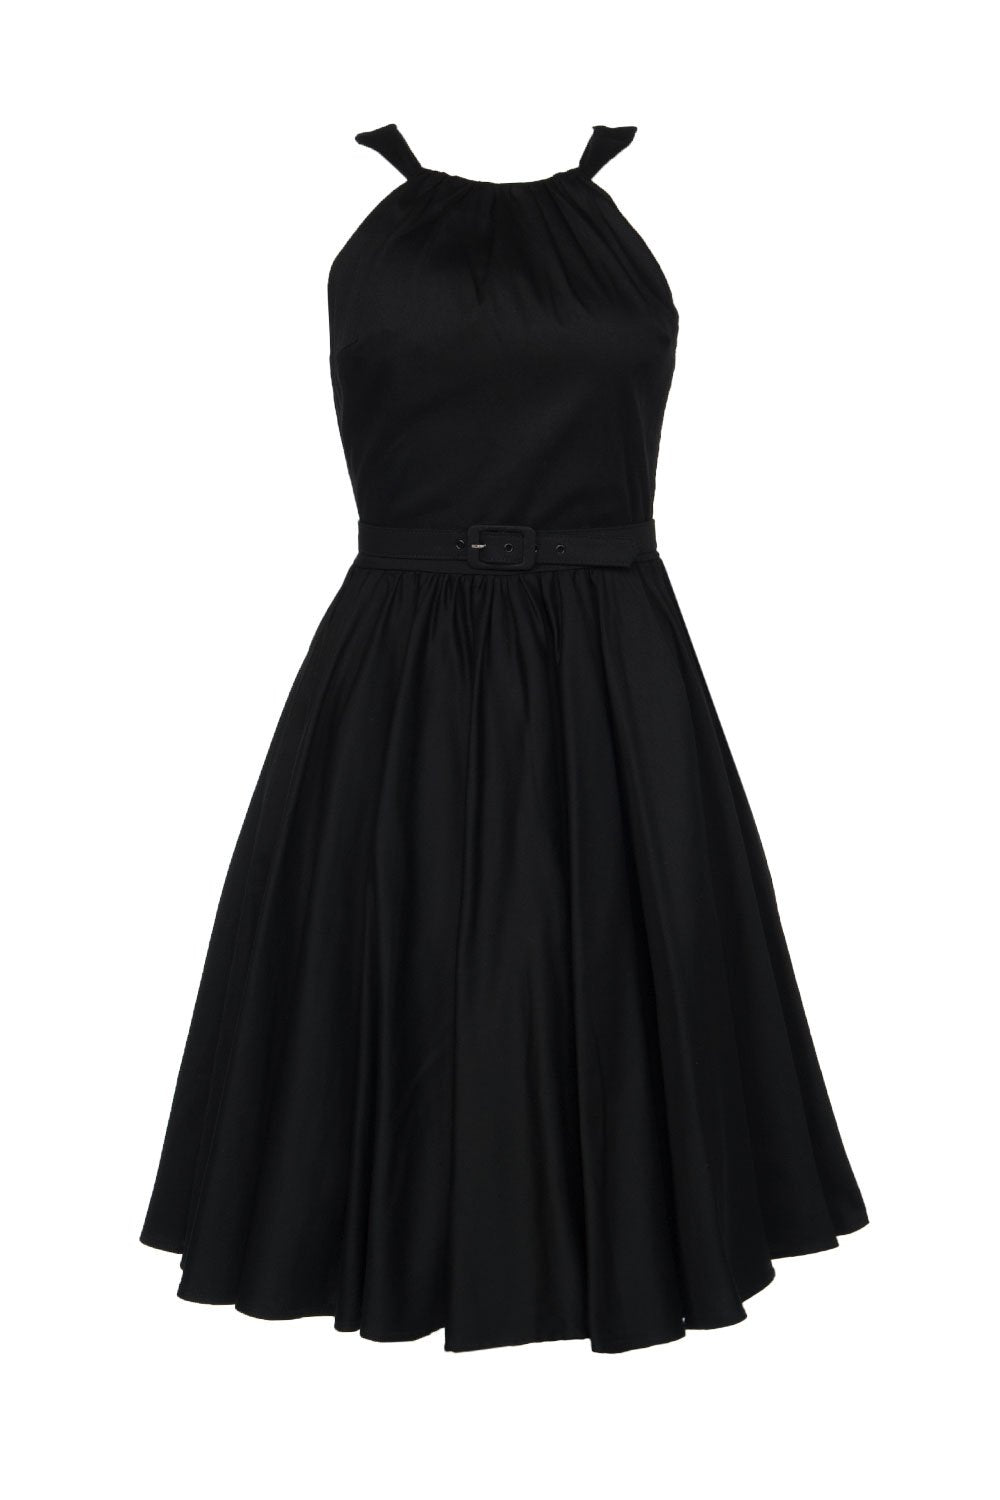 Pinup Couture Harley Dress in Black